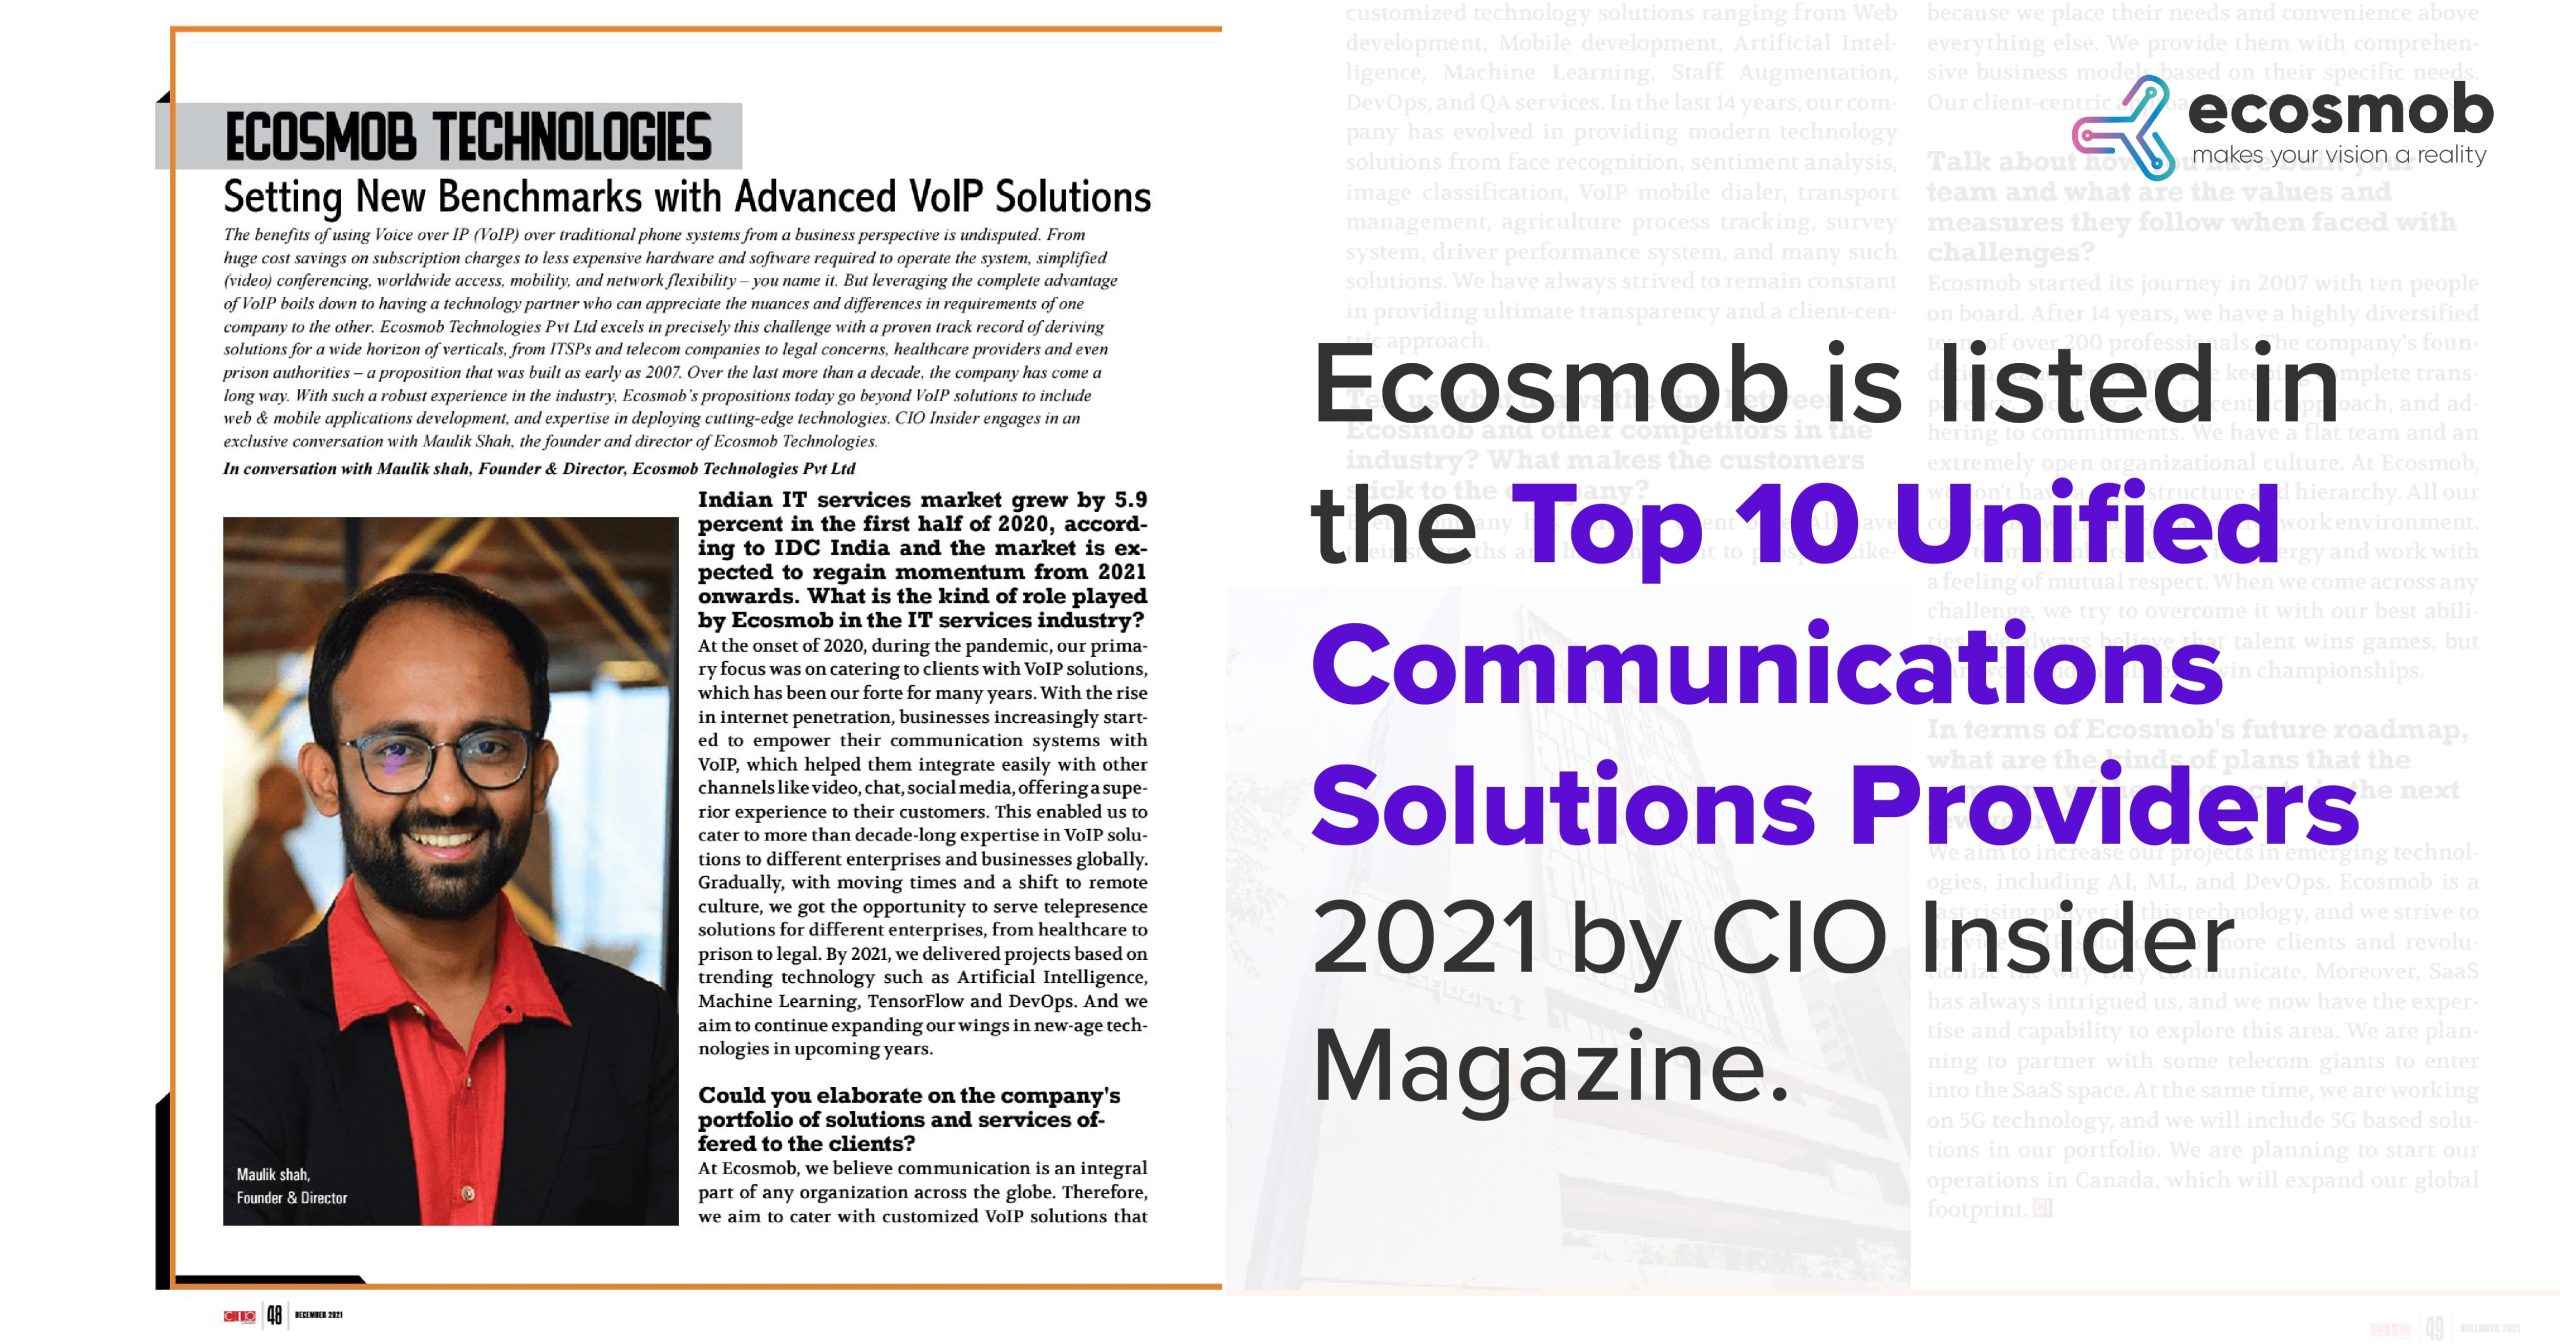 Ecosmob is listed in the top 10 Unified Communications Solutions Providers 2021 by CIO Insider Magazine.